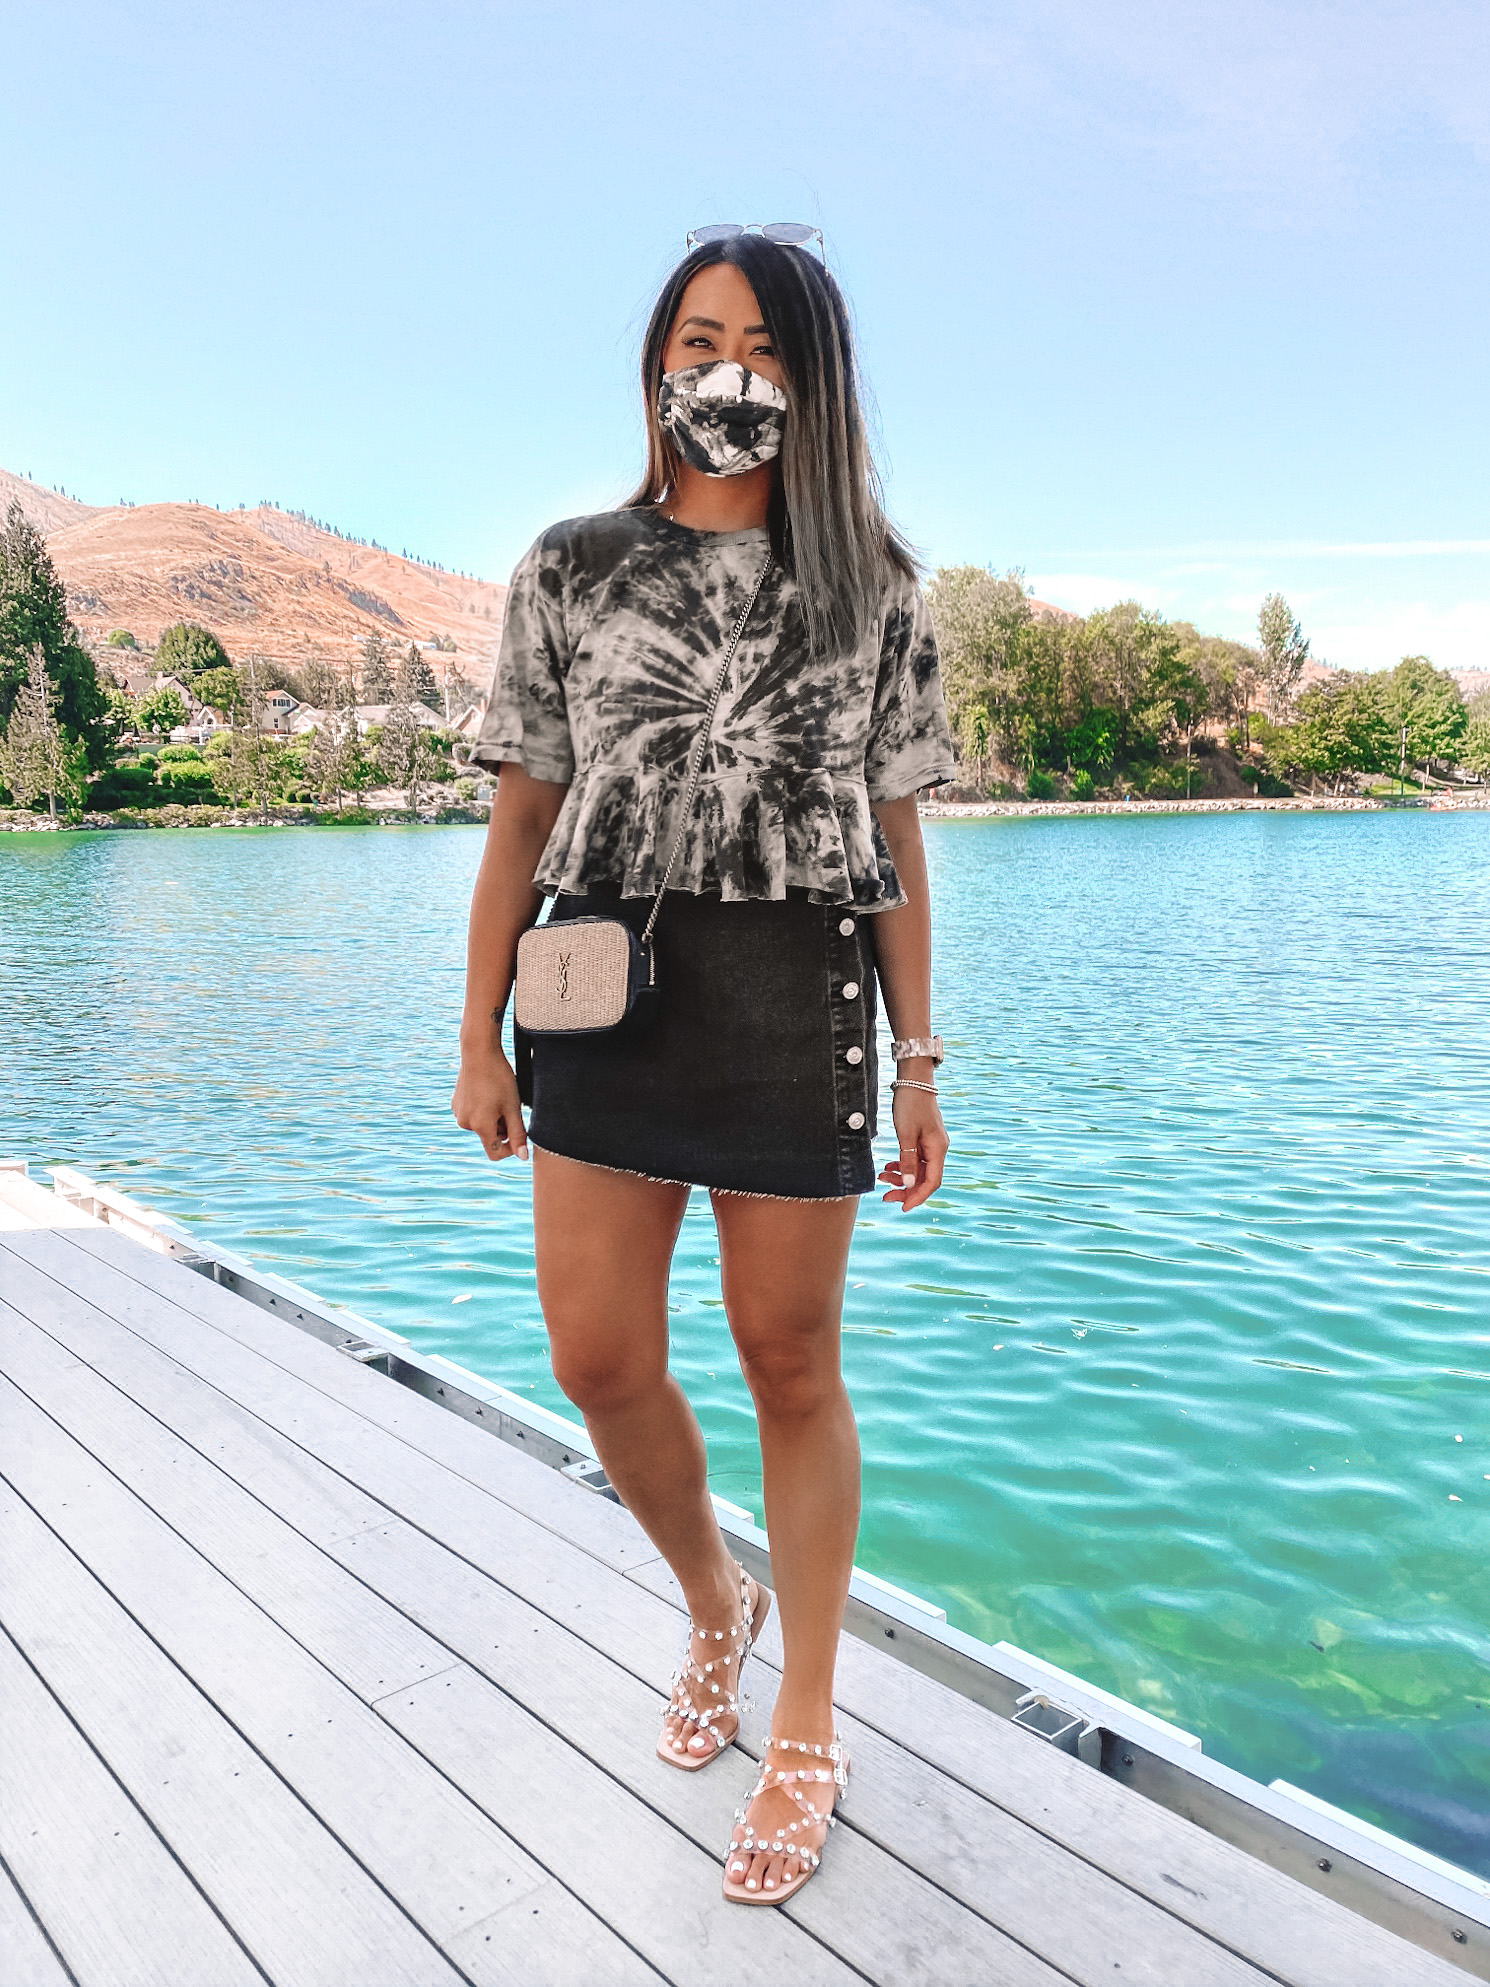 Urban Outfitters Promo Code - Outfit Ideas - Sabrina Gypsy Tan